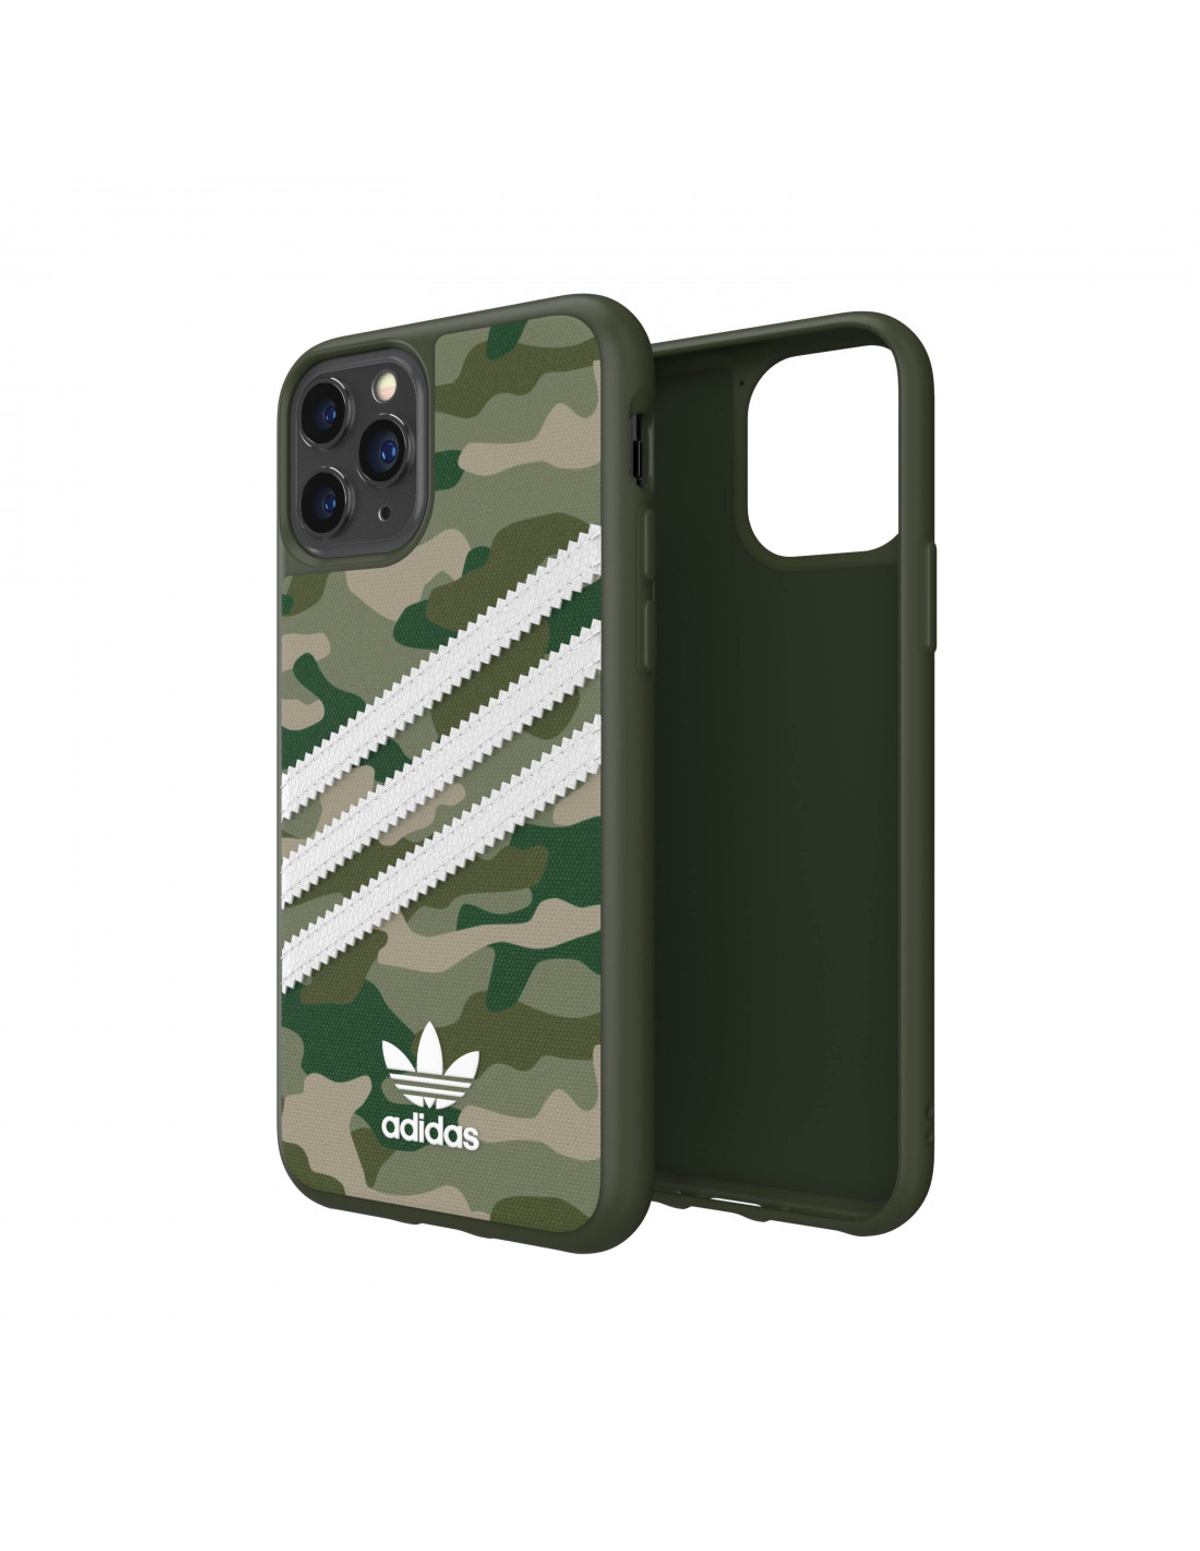 IPHONE ADIDAS WOMAN, Moulded GREEN APPLE, CAMO PRO, Case Backcover, 11